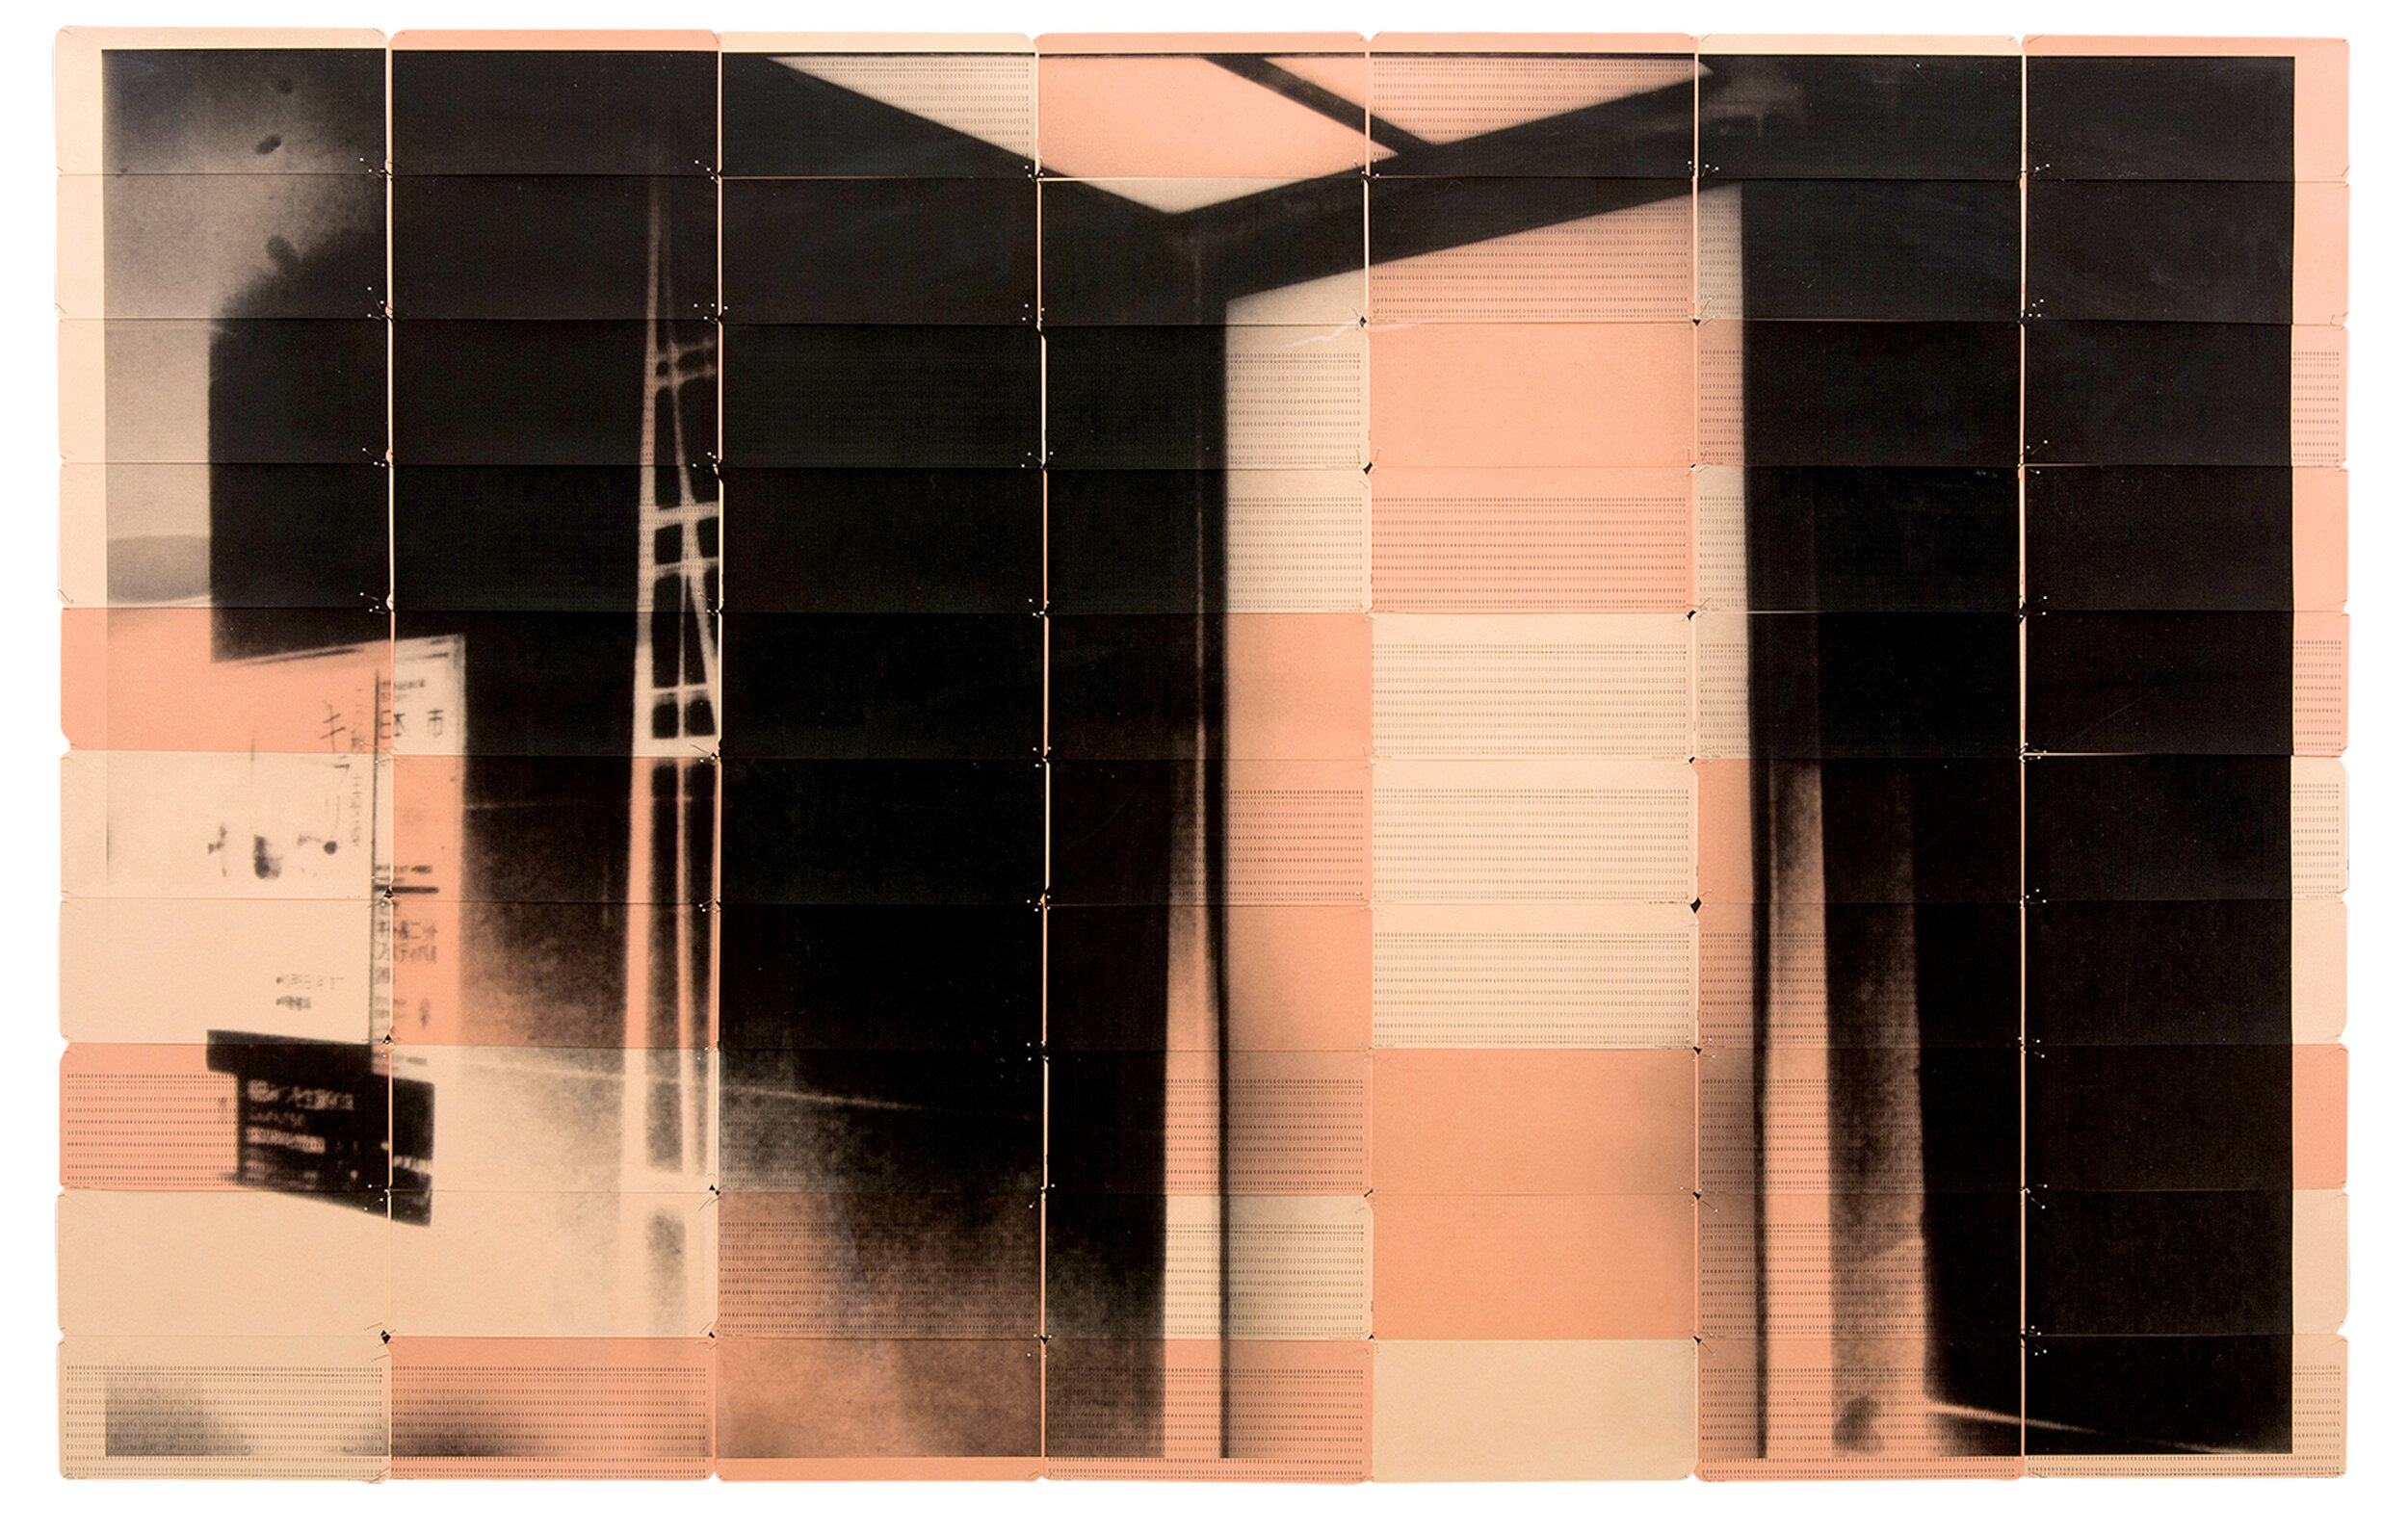 OSC64, 2018 Inkjet on 70 salmon pink and cream computer punch cards Negative date 2016 83 x 131 cm.jpg